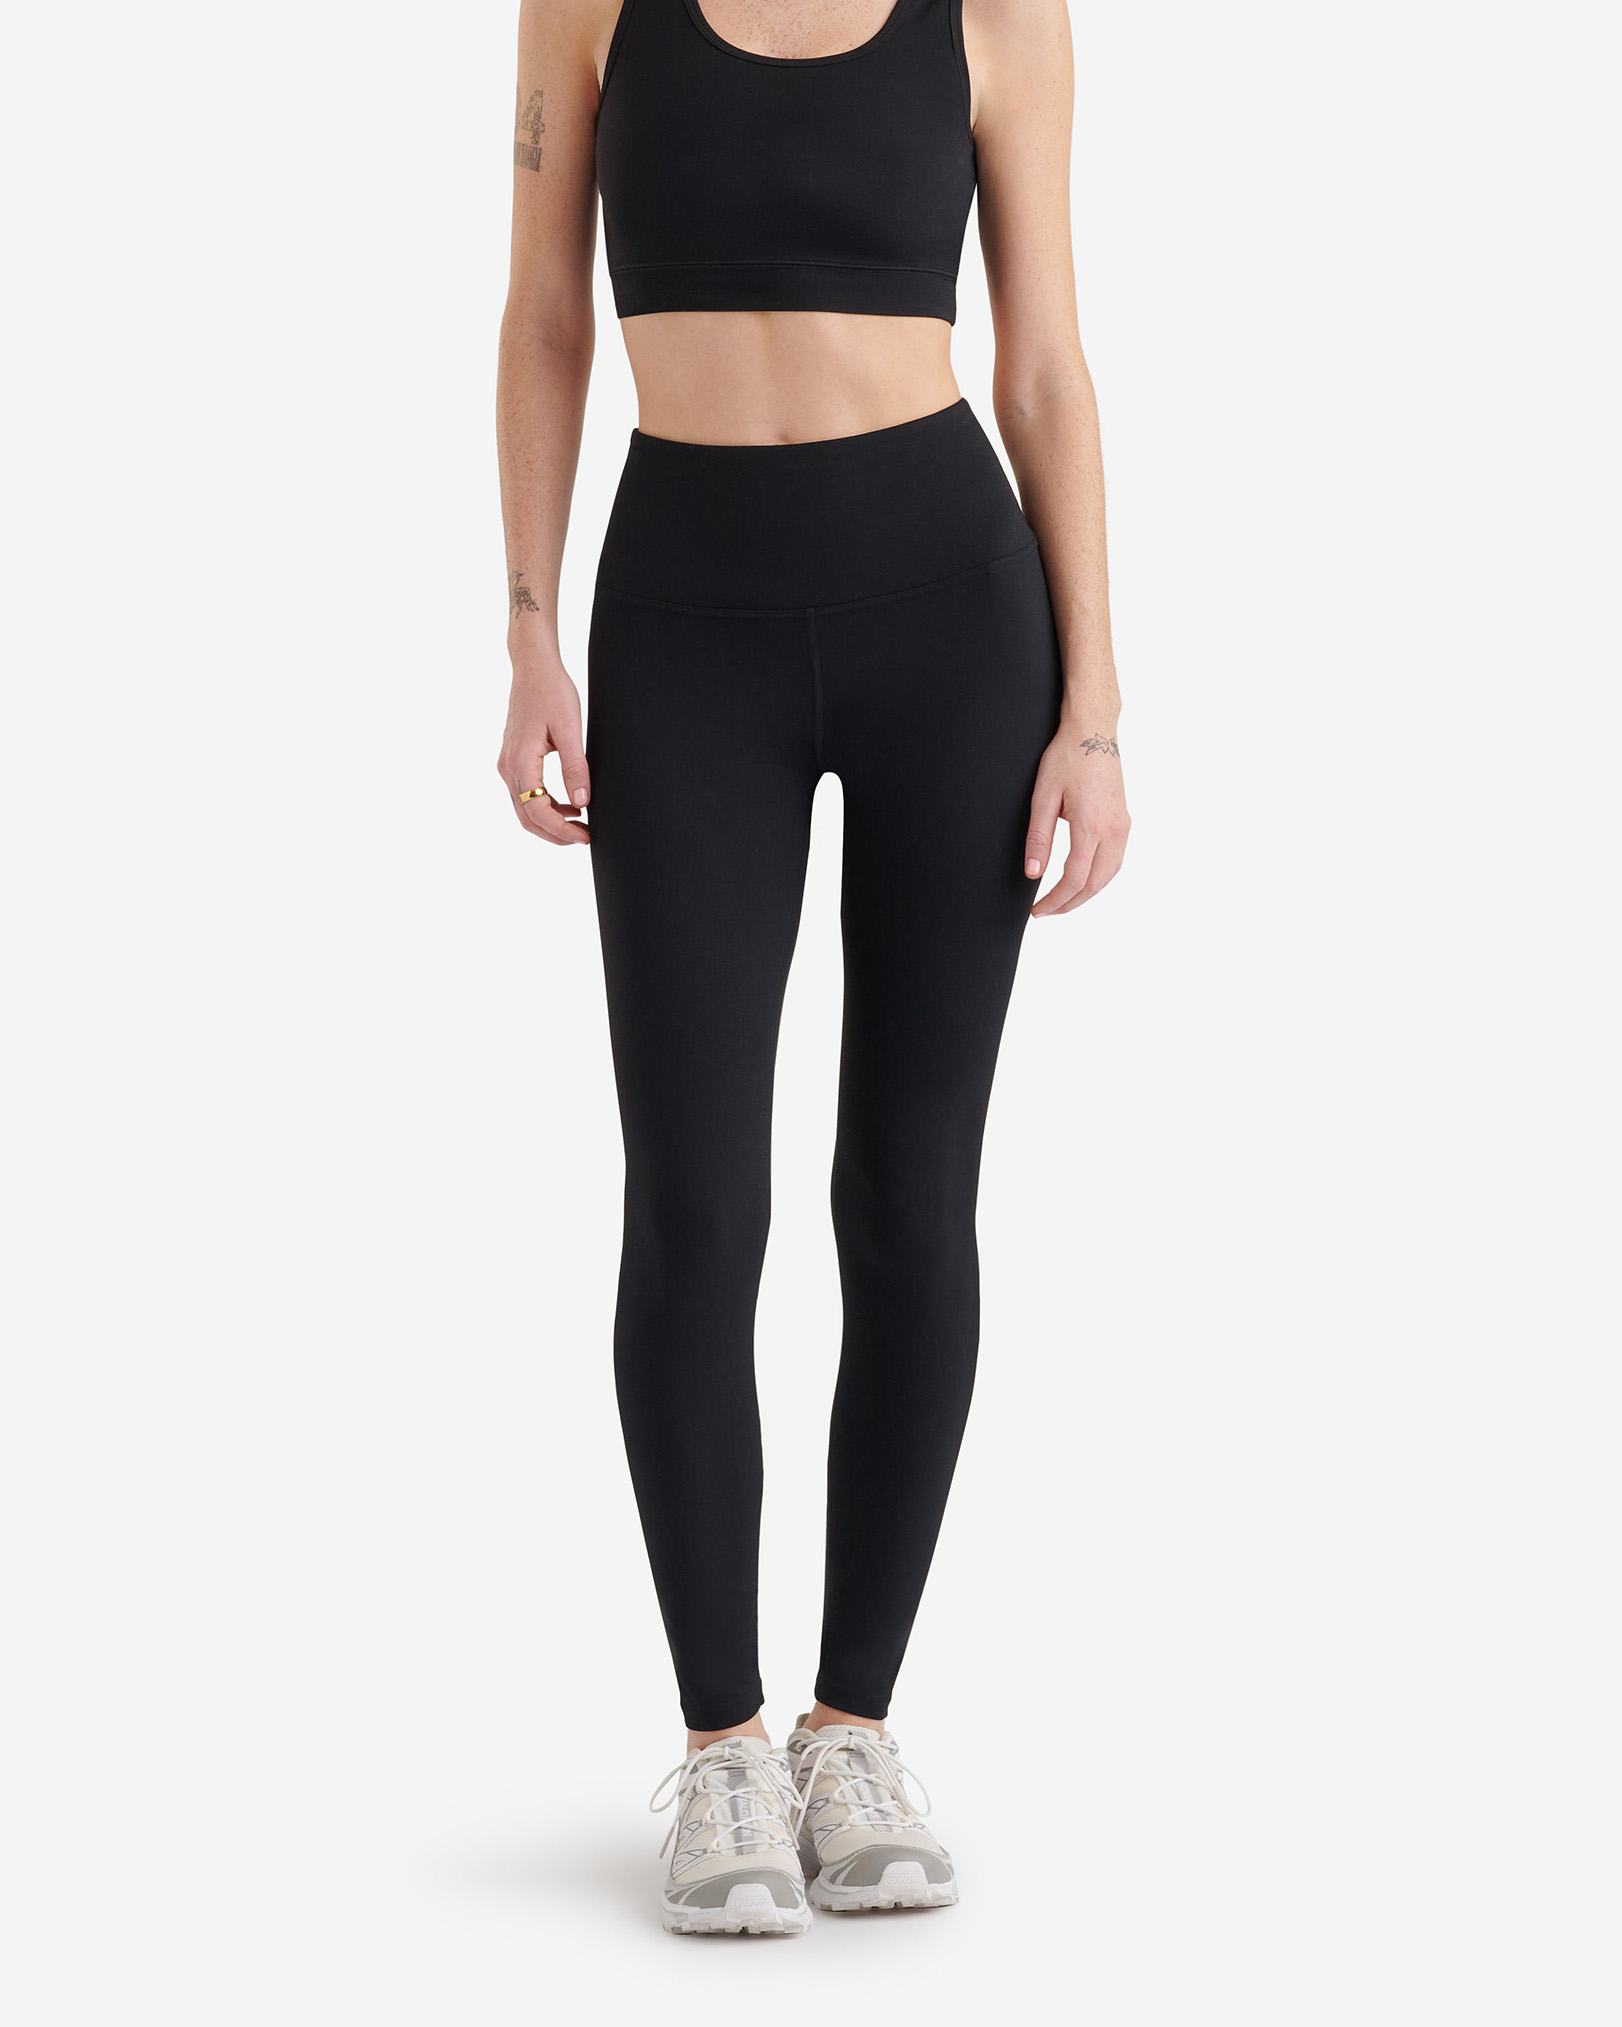 Roots Restore High Waisted Legging Pants in Black